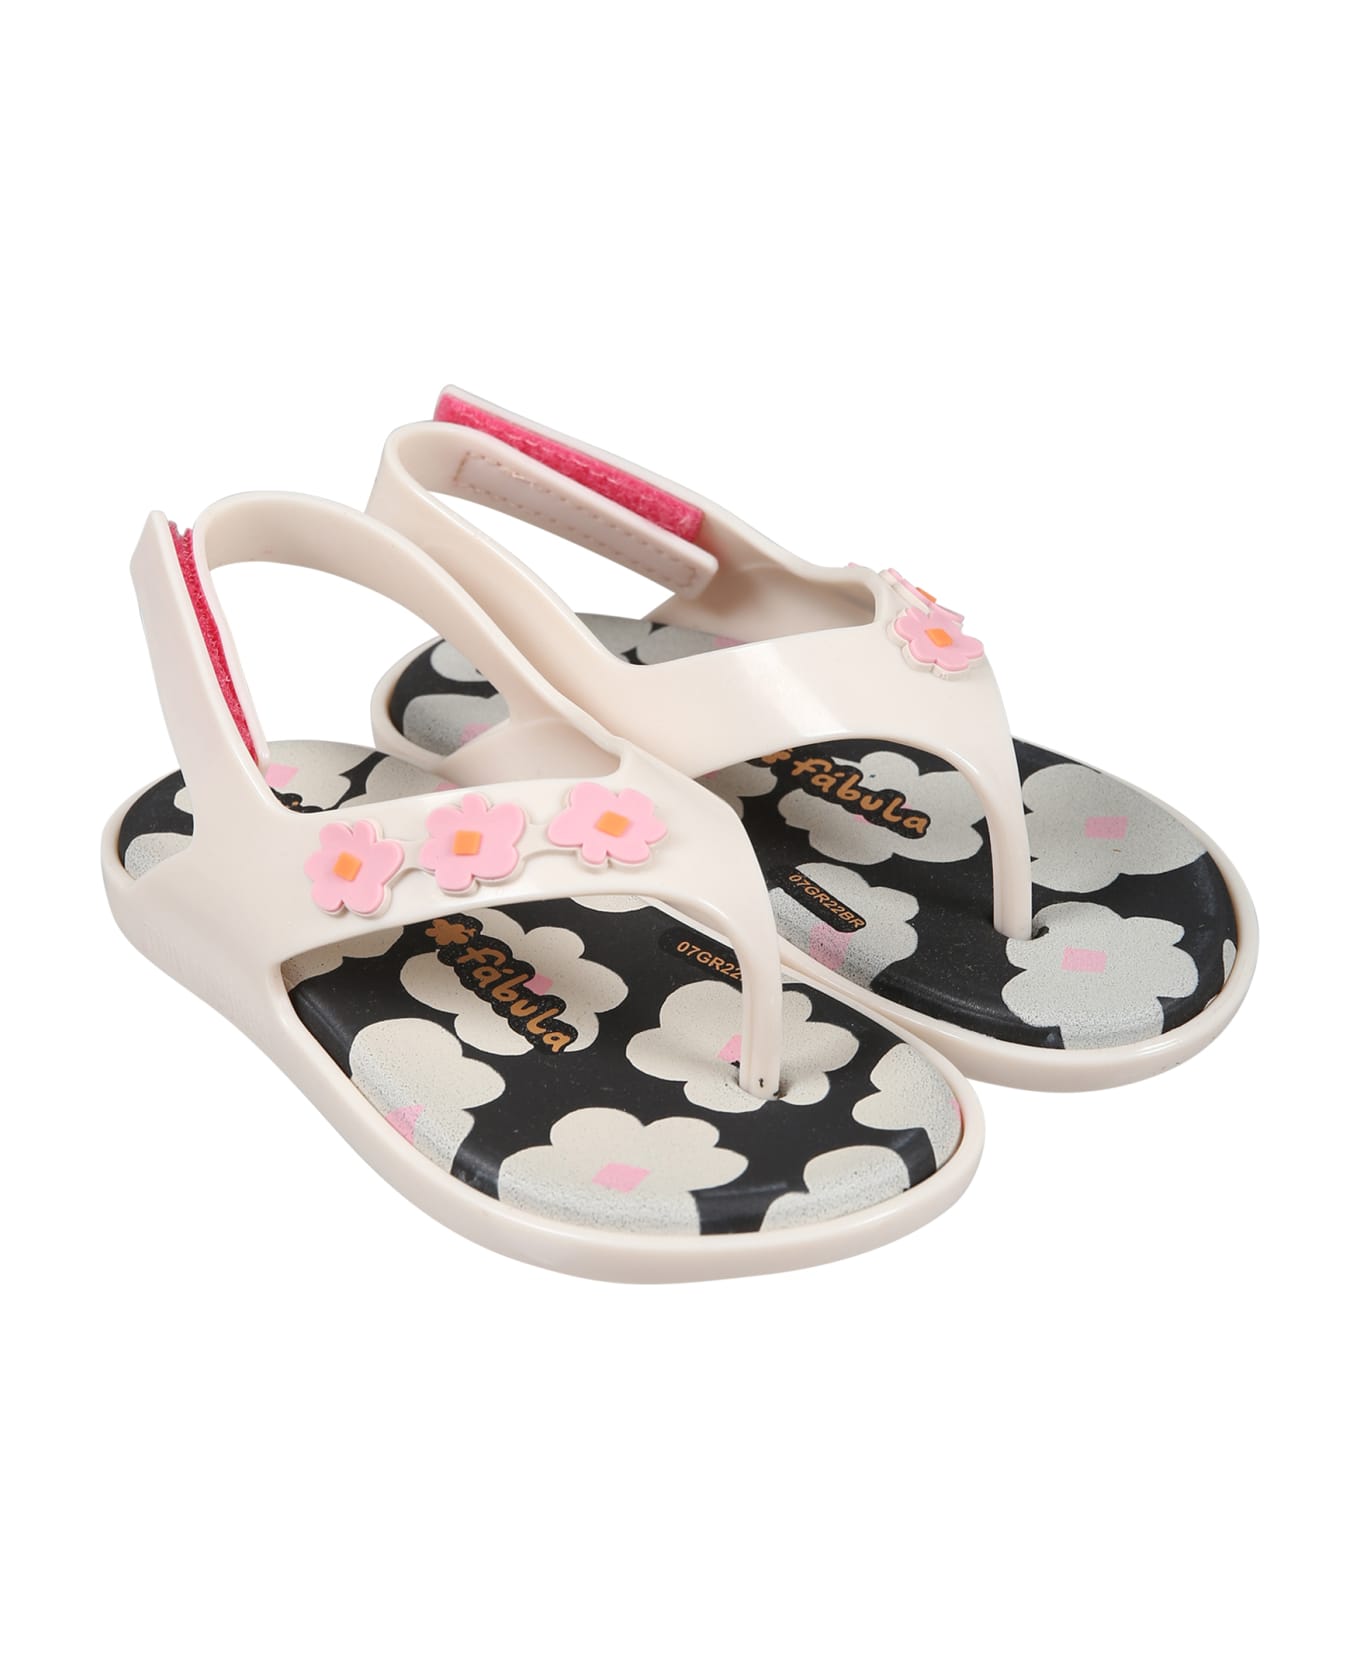 Melissa Pink Flip Flops For Girl With Flowers And Logo - Pink